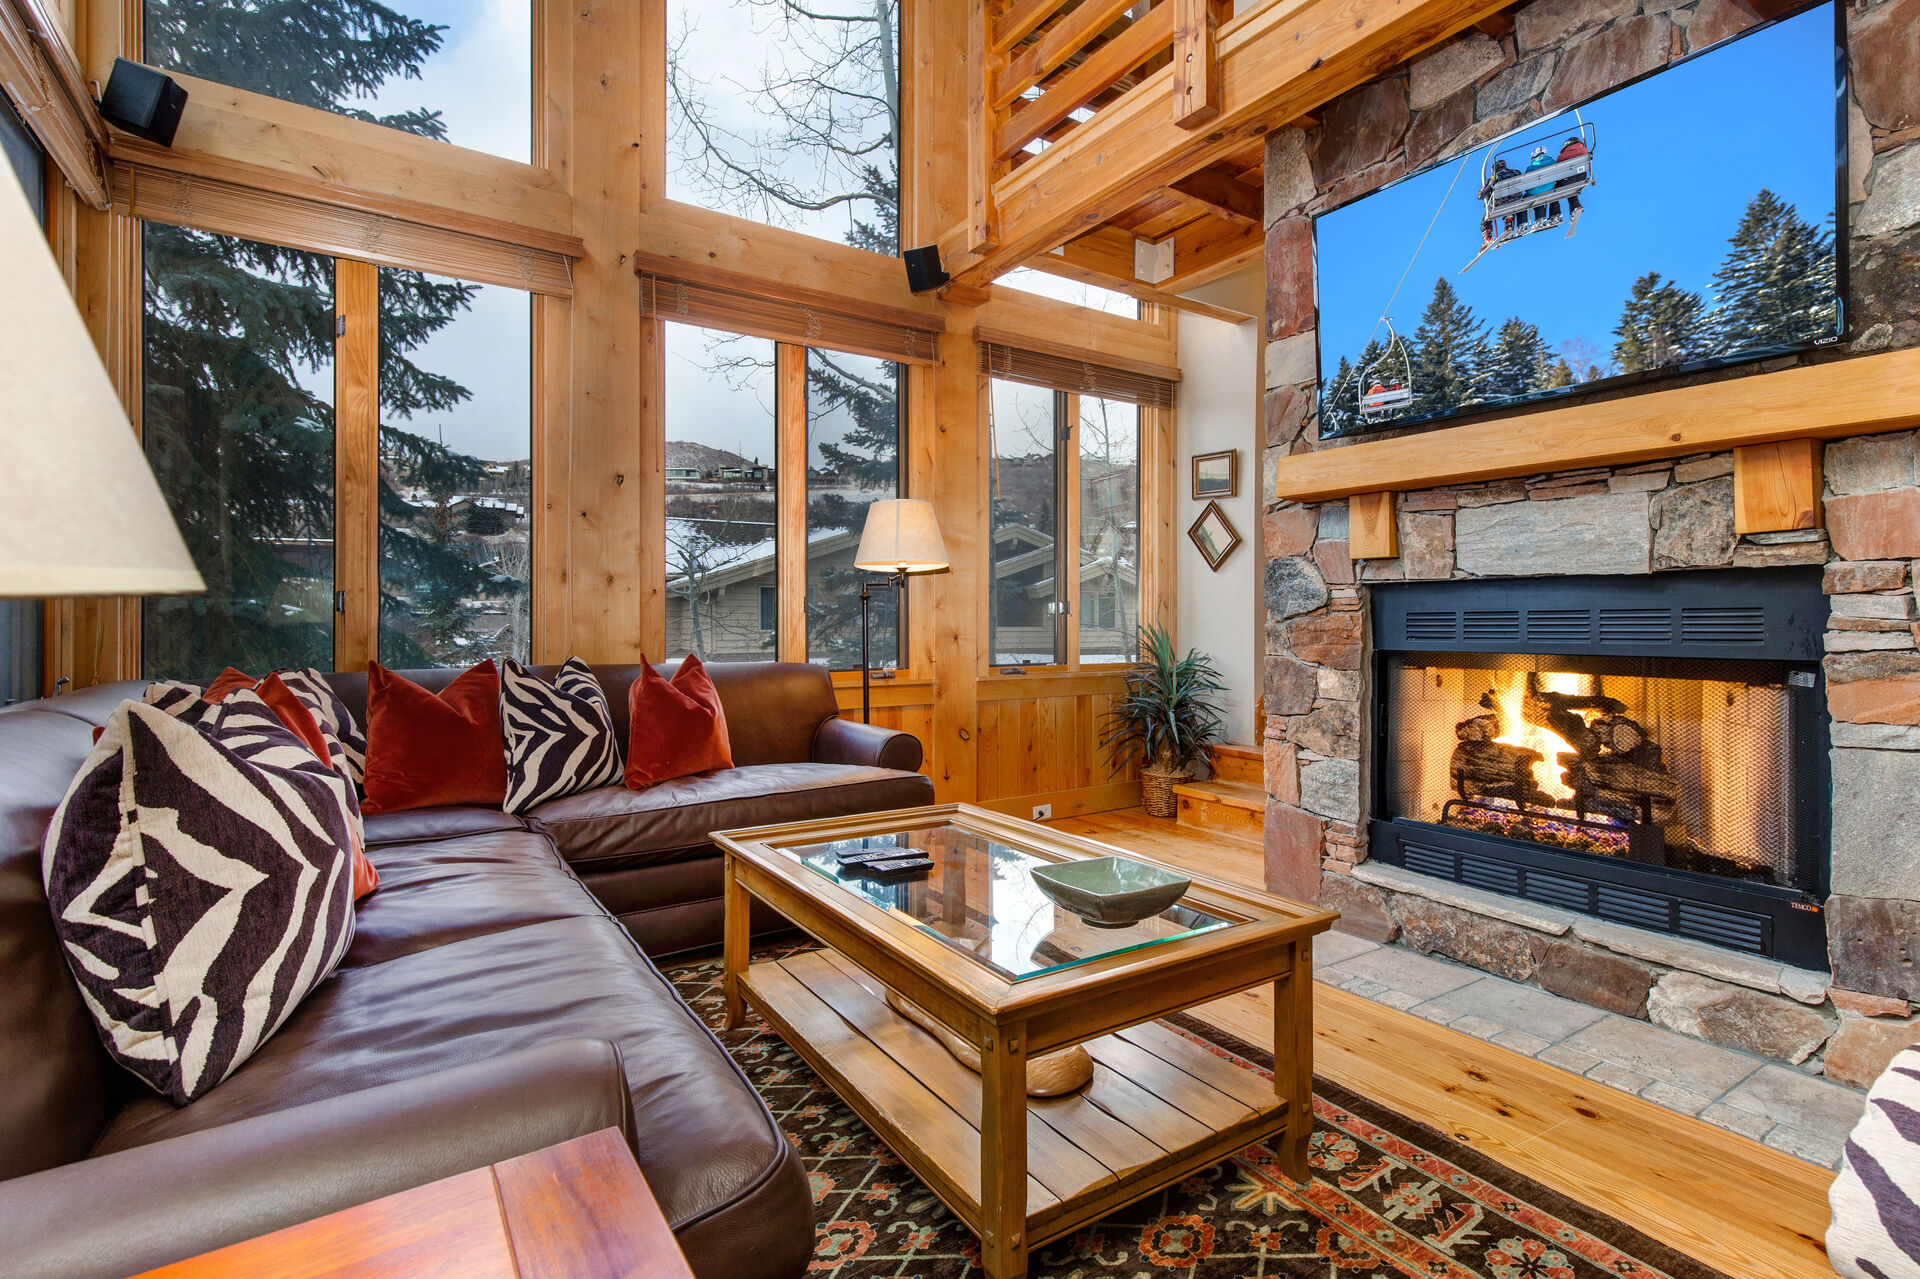 The Living Room with Mountains Views, and Fireplace in Our Deer Valley Rental.